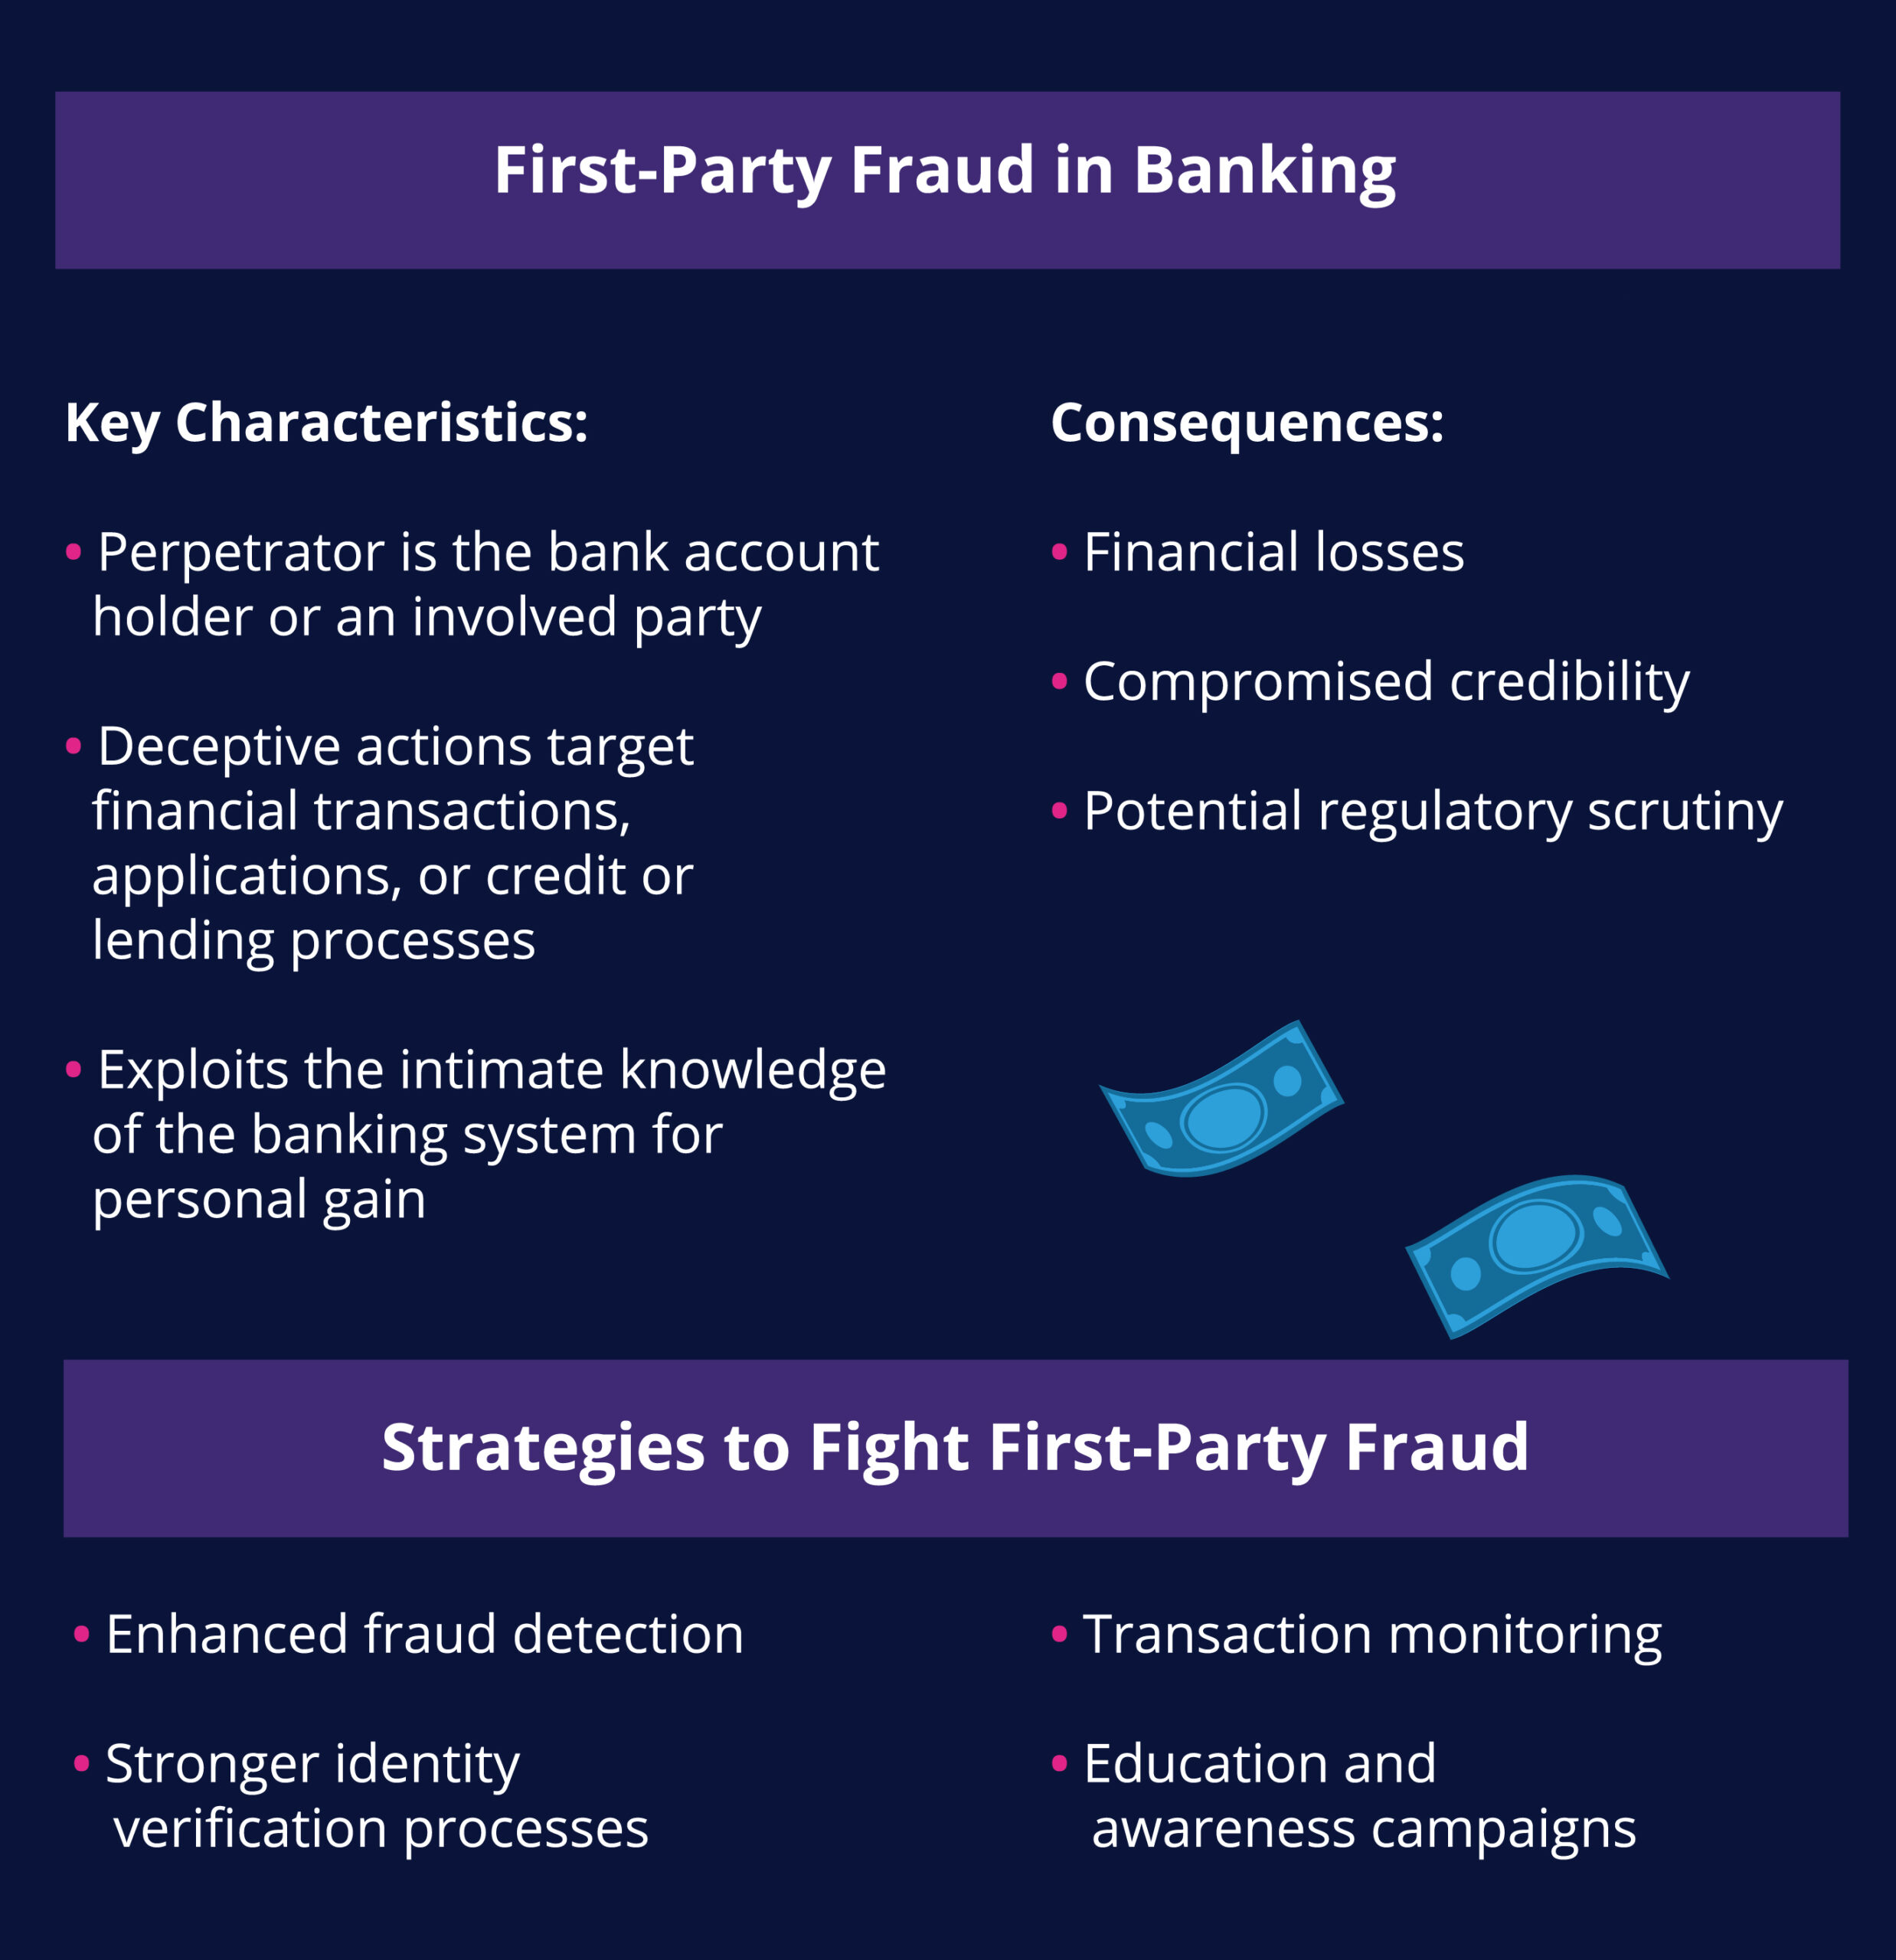 Chart outlining key characteristics of first-party fraud in banking and strategies for banks to fight first-party fraud